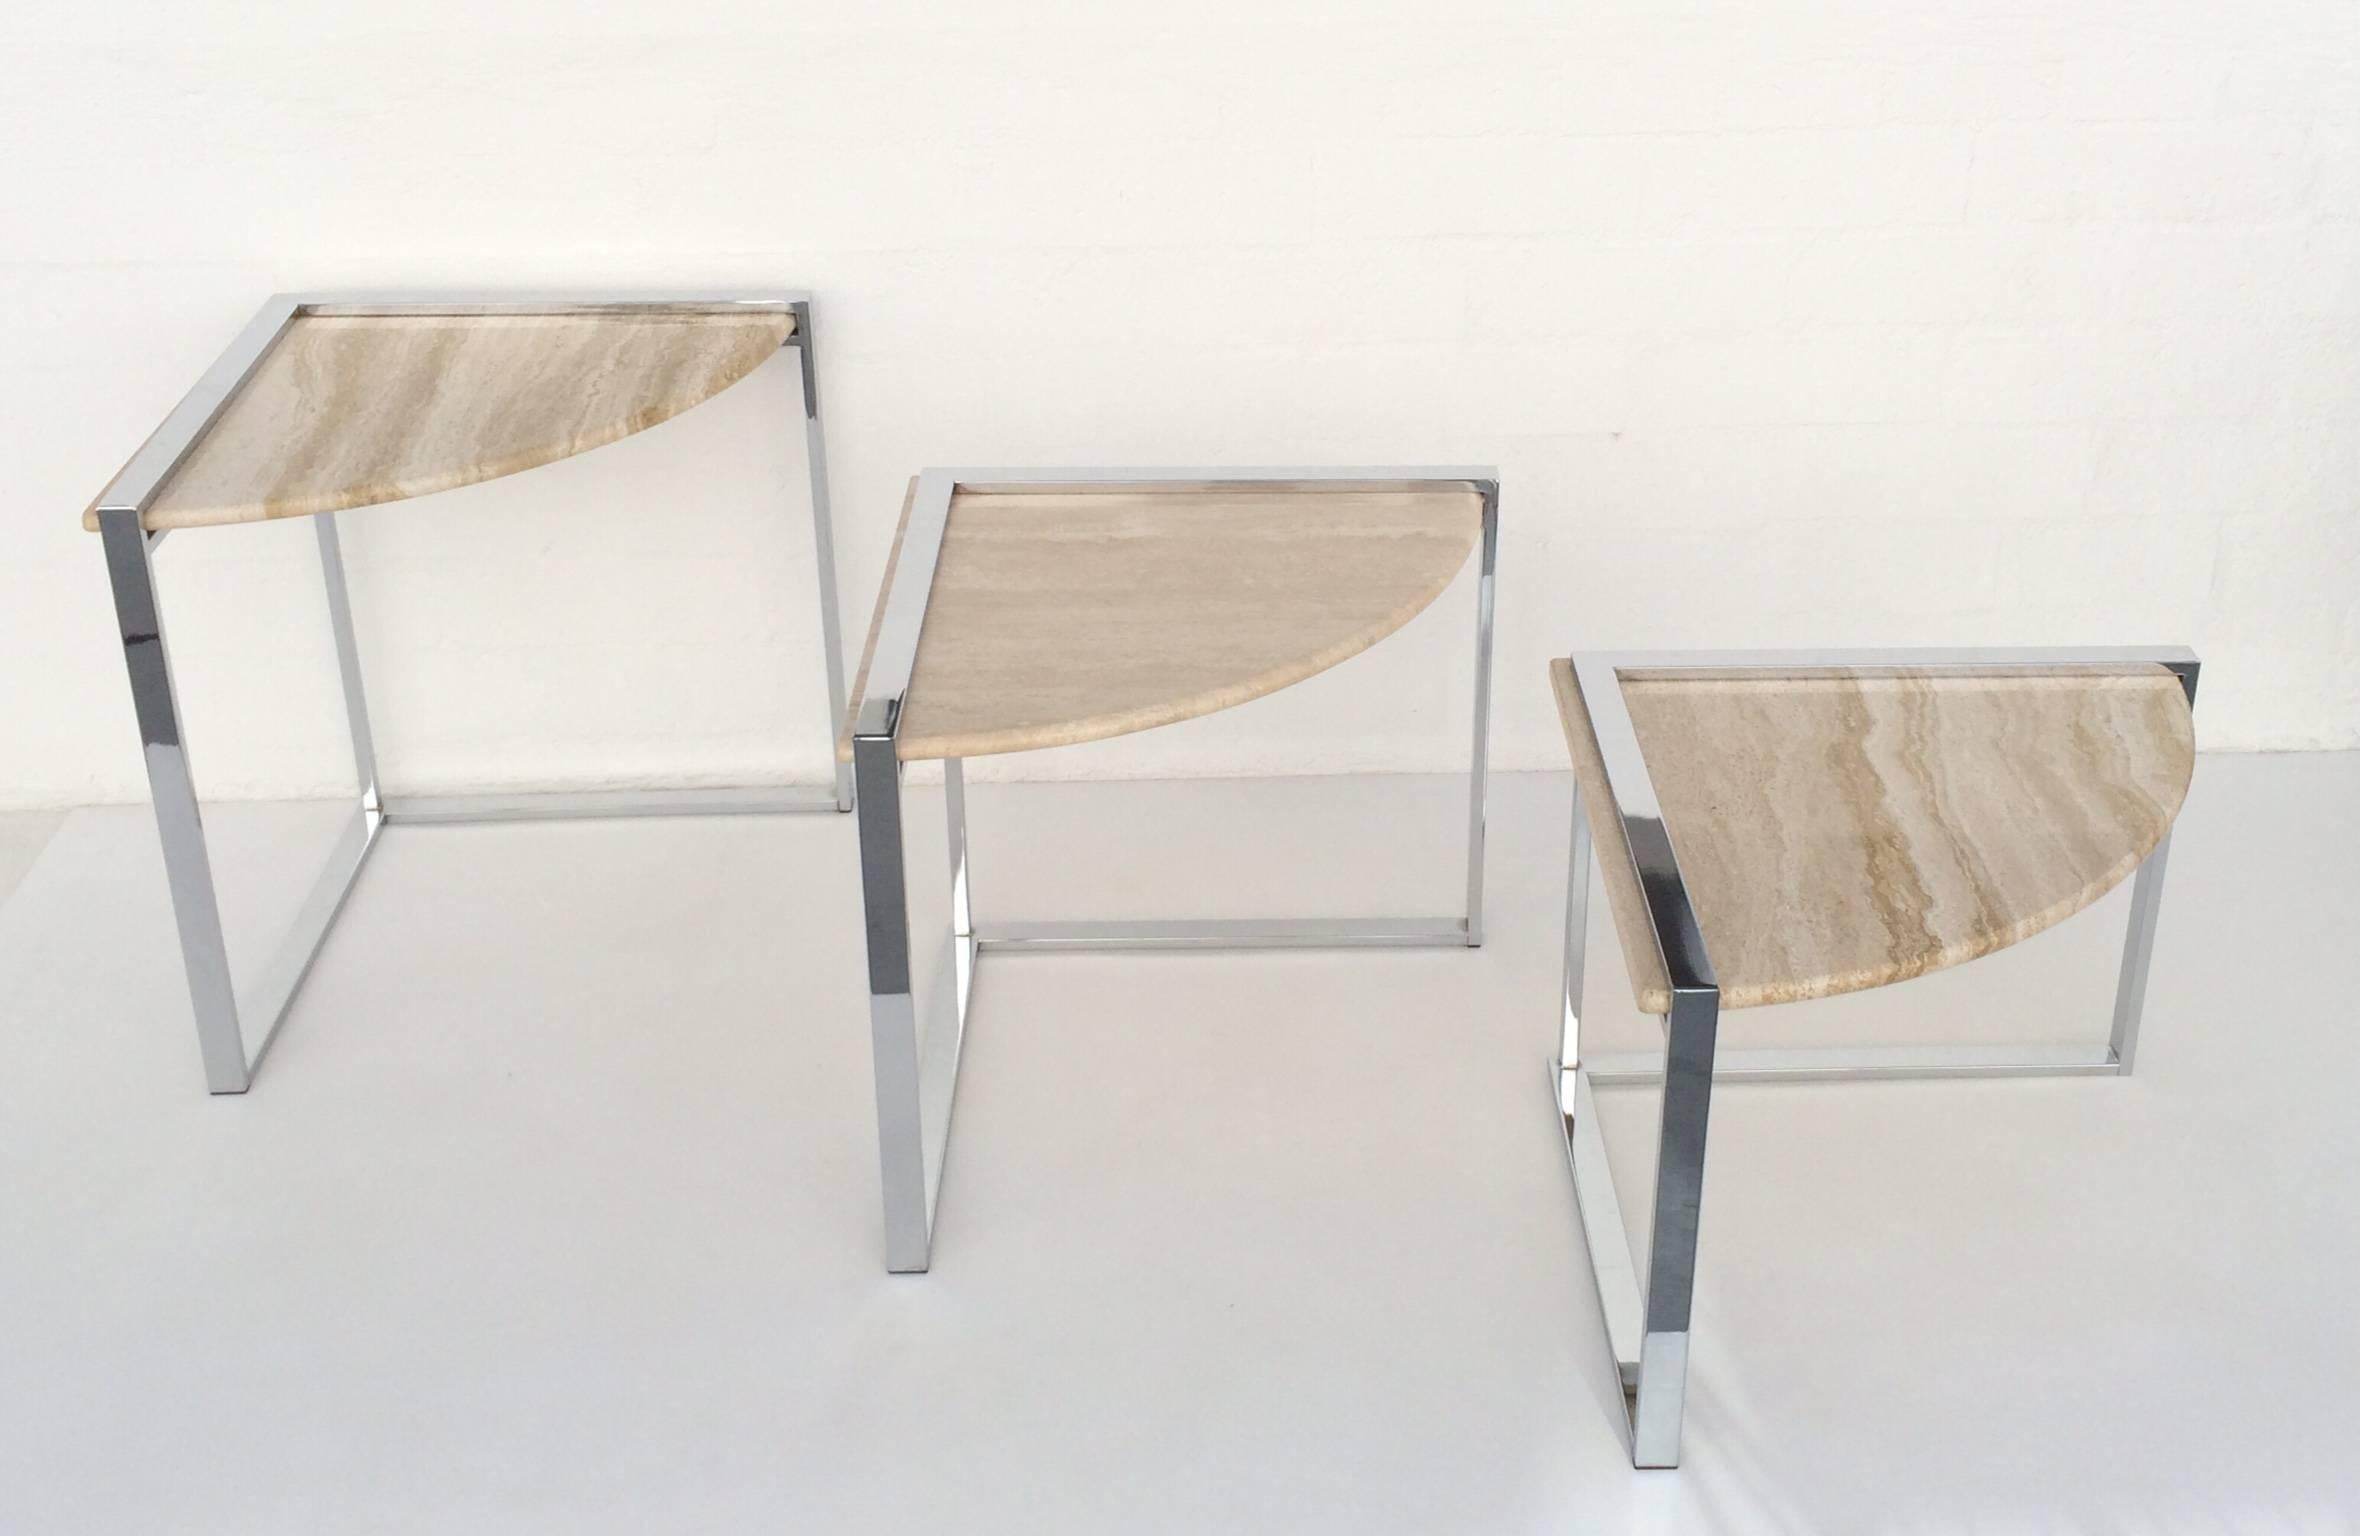  Travertine and Polished Chrome Nesting Tables Designed by Milo Baughman 2